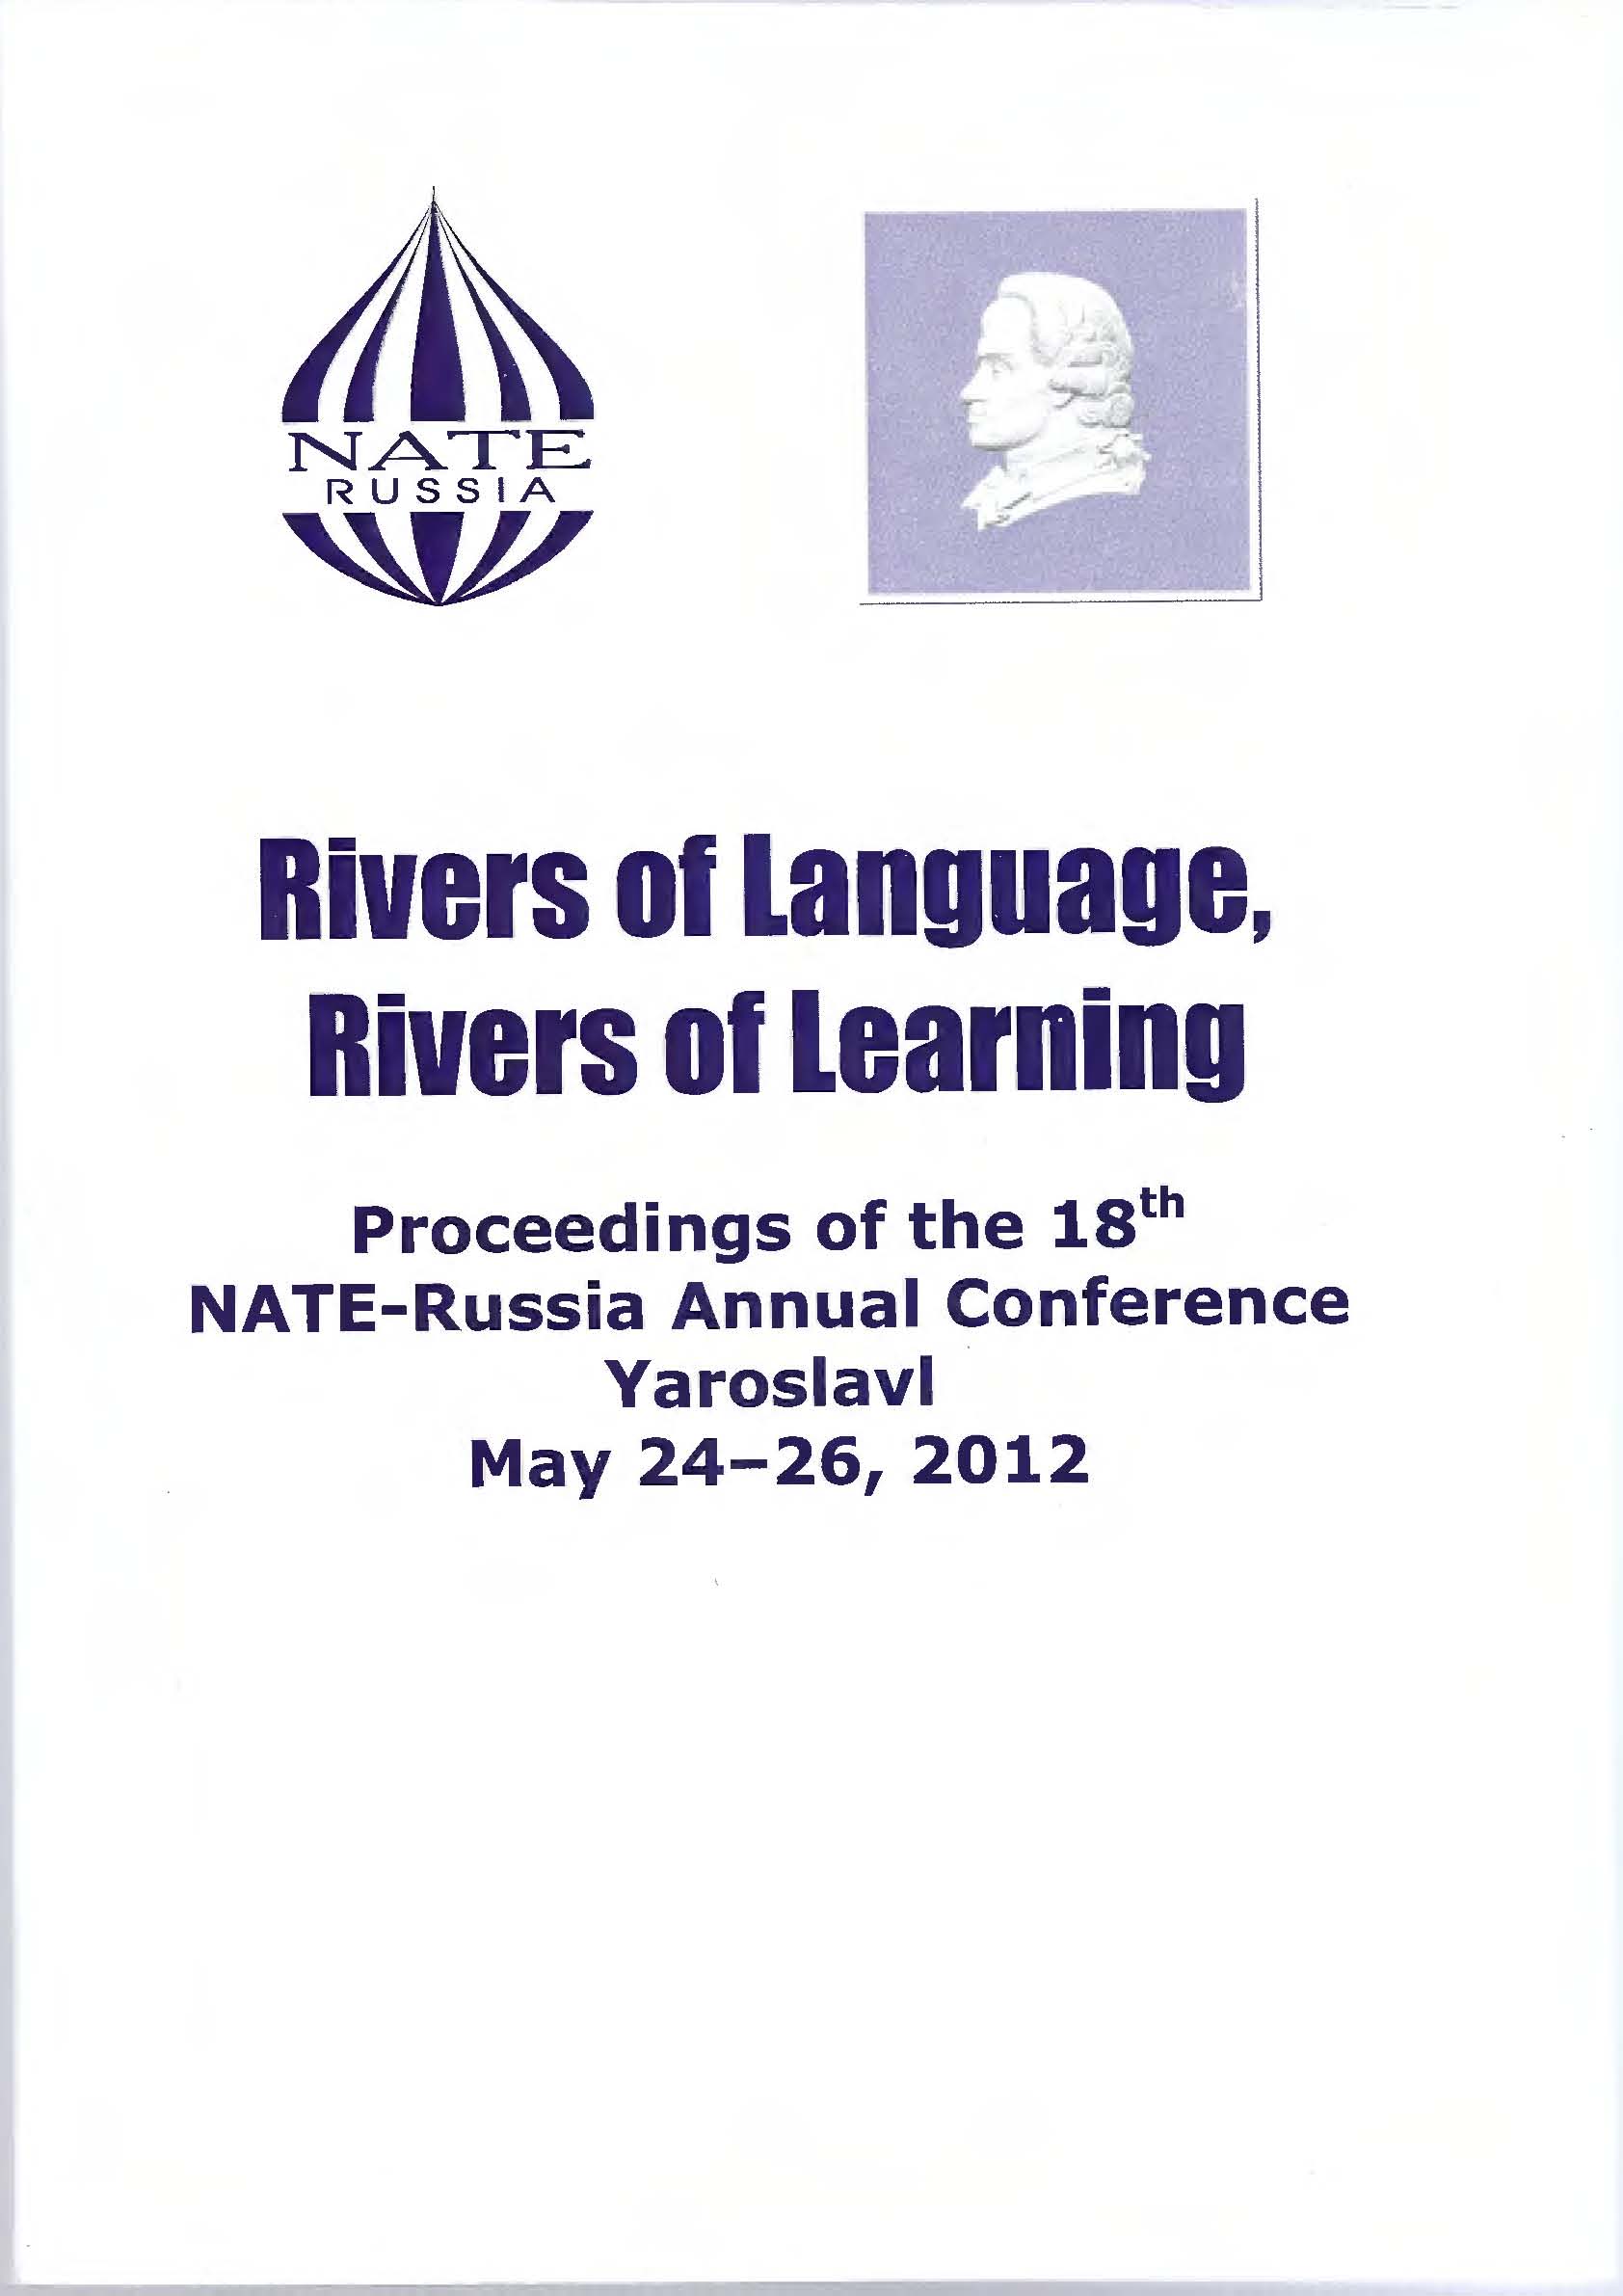 Rivers of Language, Rivers of Learning. Proceedings of the 18th NATE-Russia Annual Conference. Yaroslavl, May 24-26, 2012